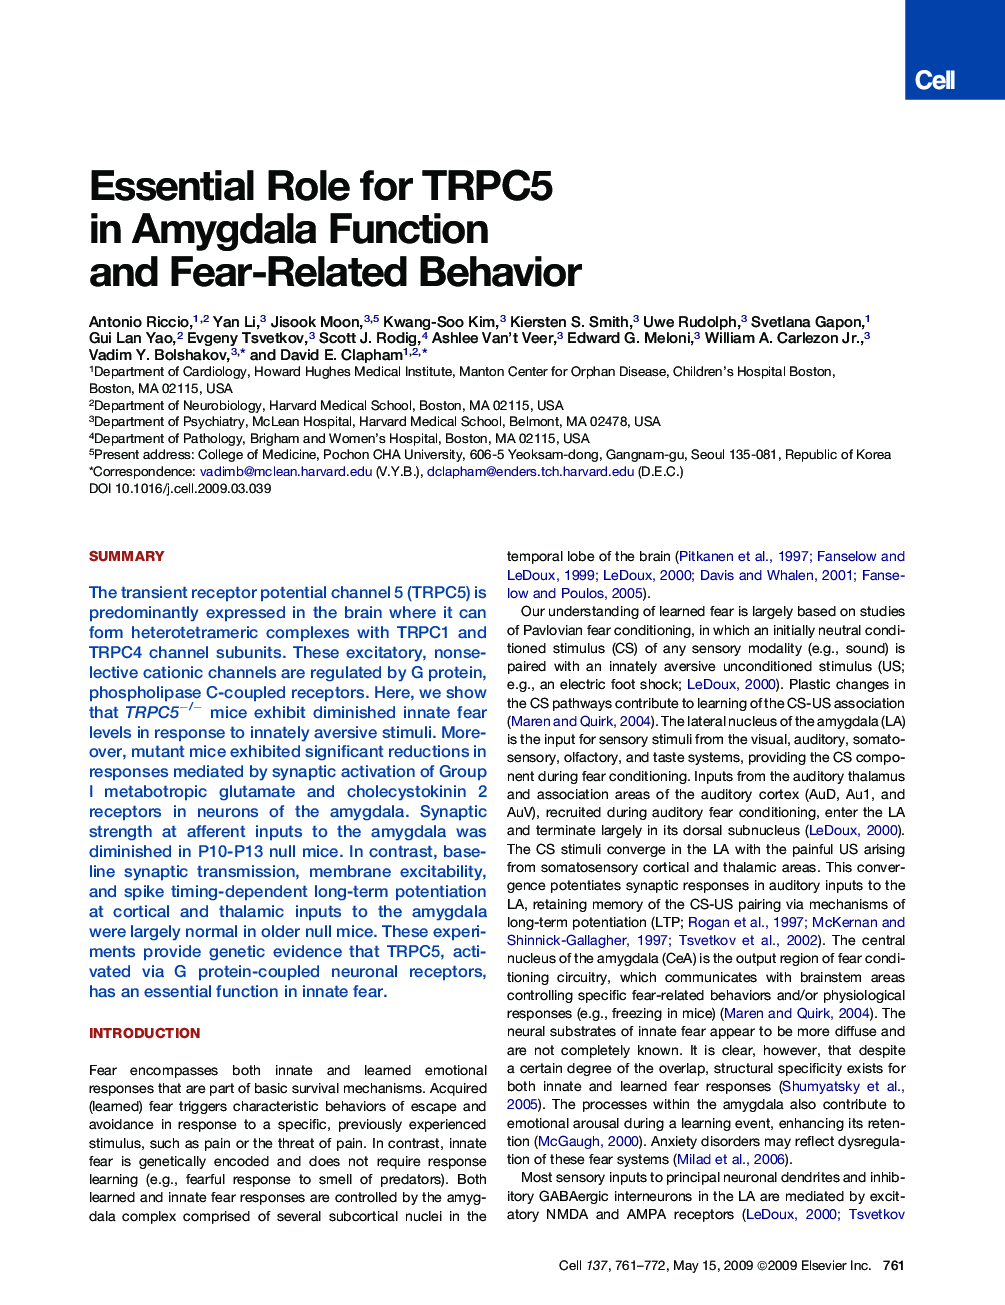 Essential Role for TRPC5 in Amygdala Function and Fear-Related Behavior